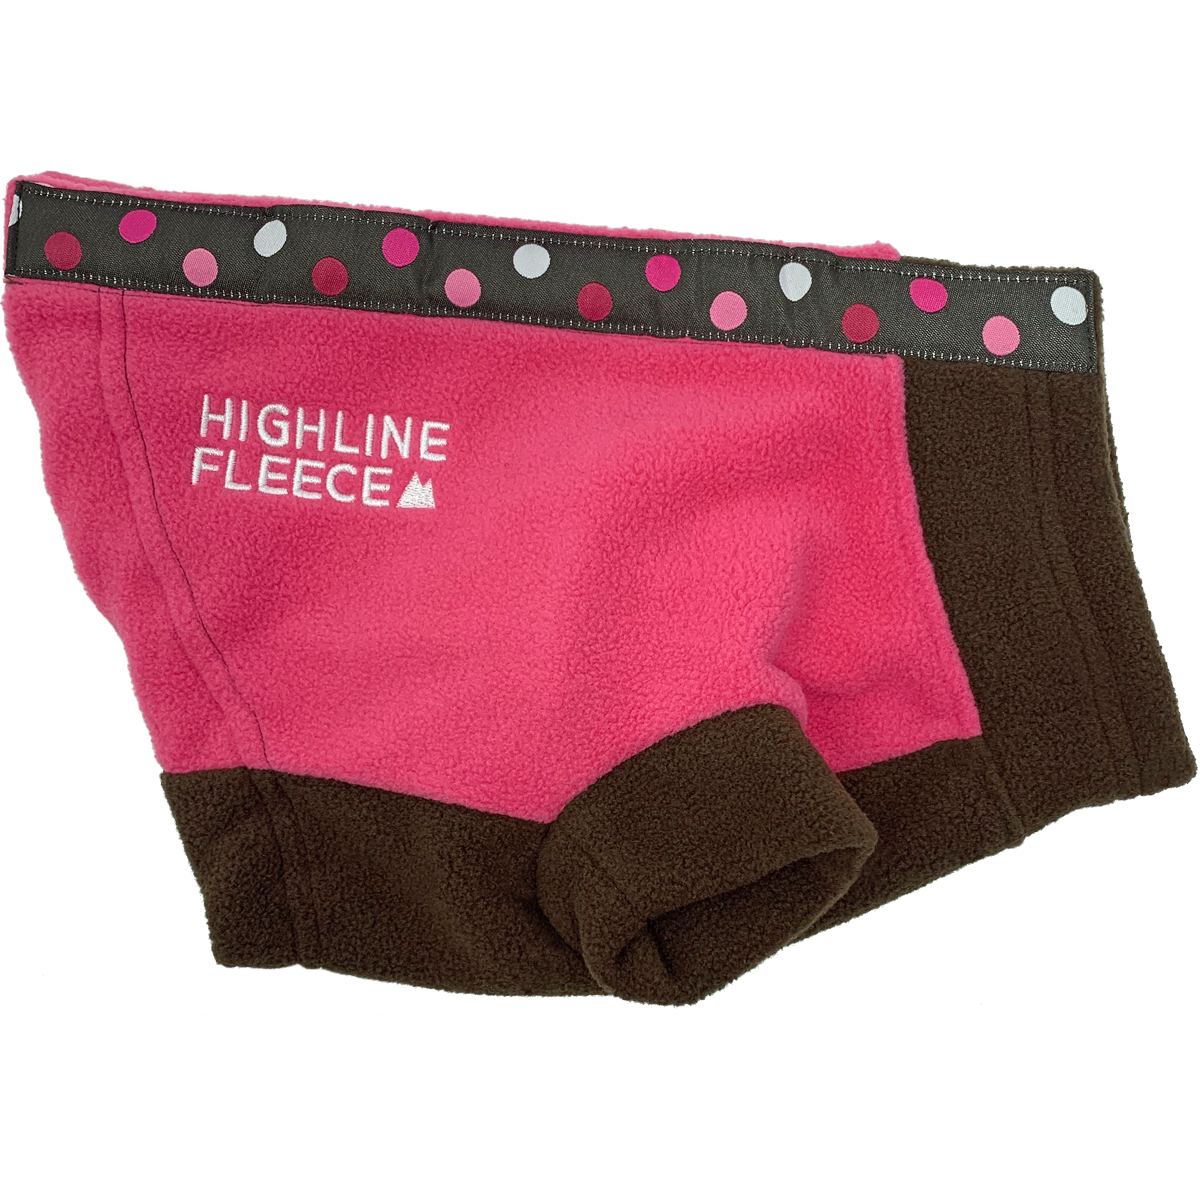 Highline Fleece Dog Coat - Pink and Brown with Polka Dots